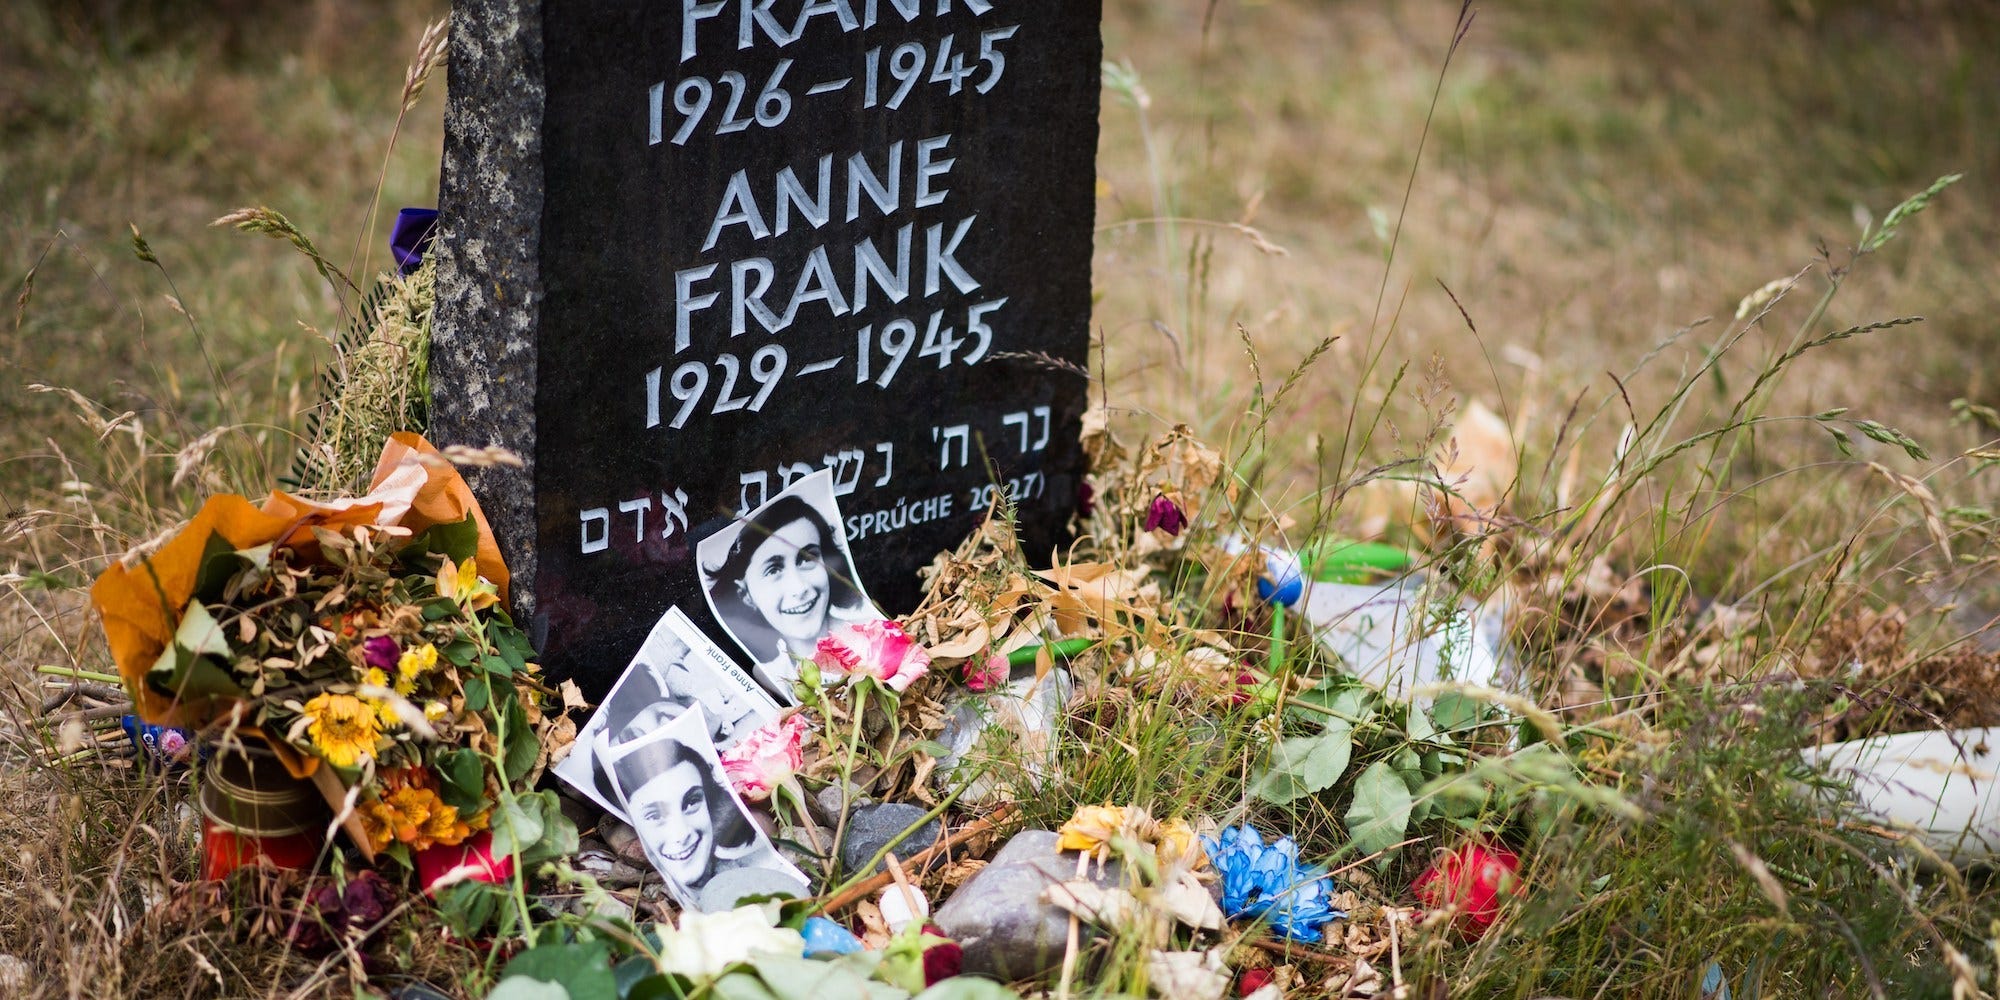 A memorial stone for Margot Frank and Anne Frank is pictured on the grounds of the former Prisoner of War (POW) and concentration camps Bergen-Belsen in Bergen,Germany, on June 21, 2015.